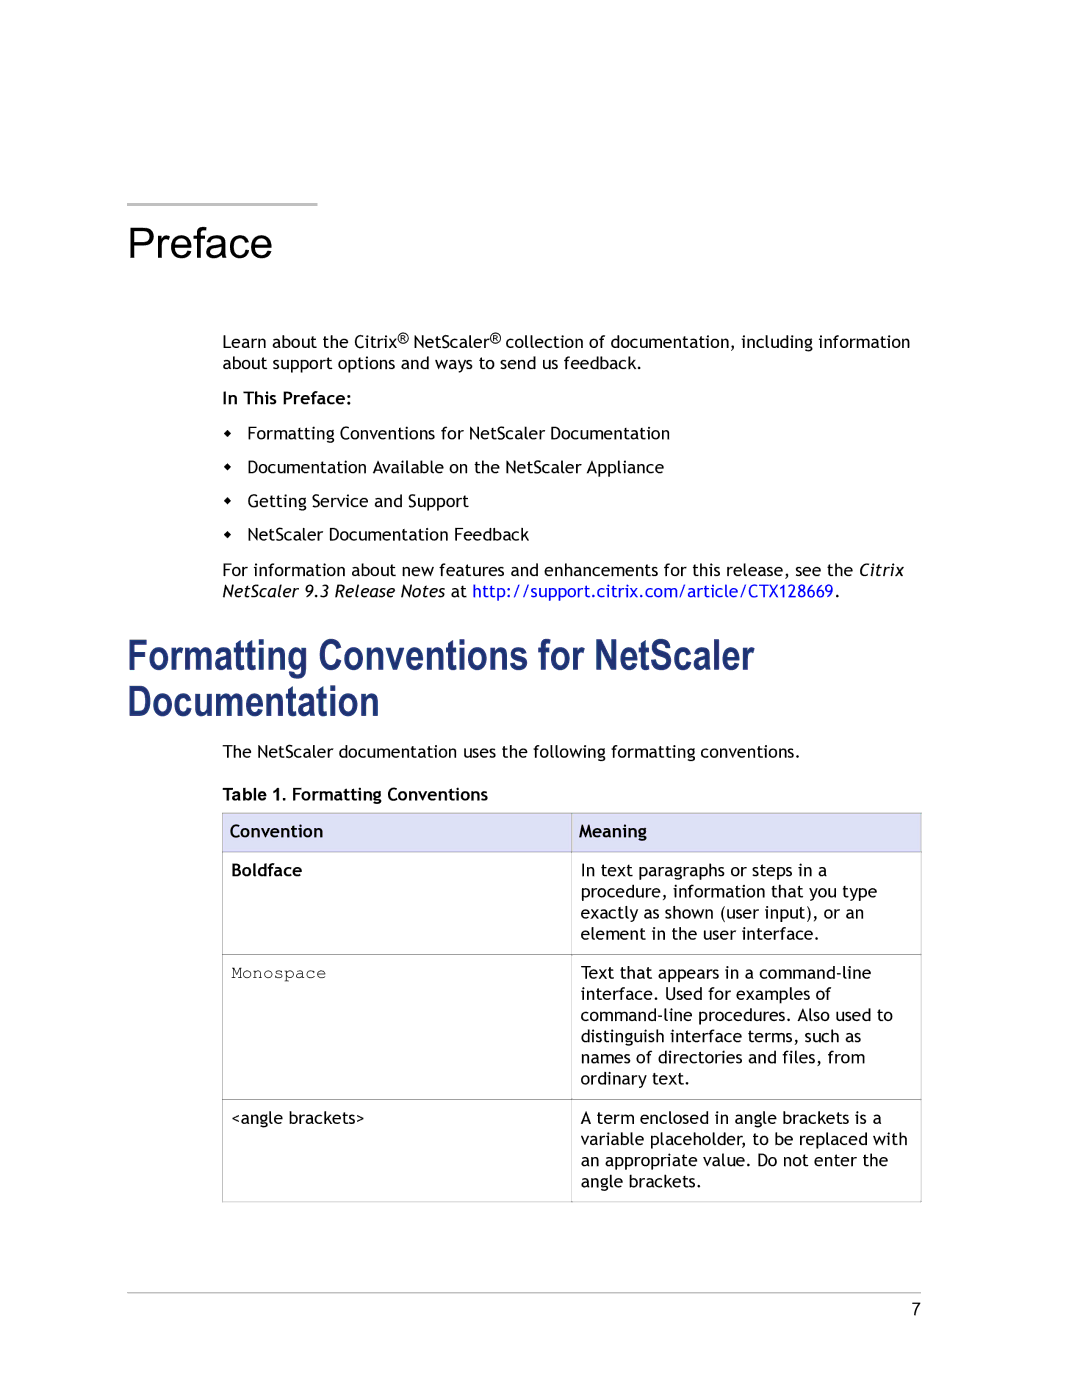 Citrix Systems 9.3 setup guide Formatting Conventions for NetScaler Documentation, This Preface 